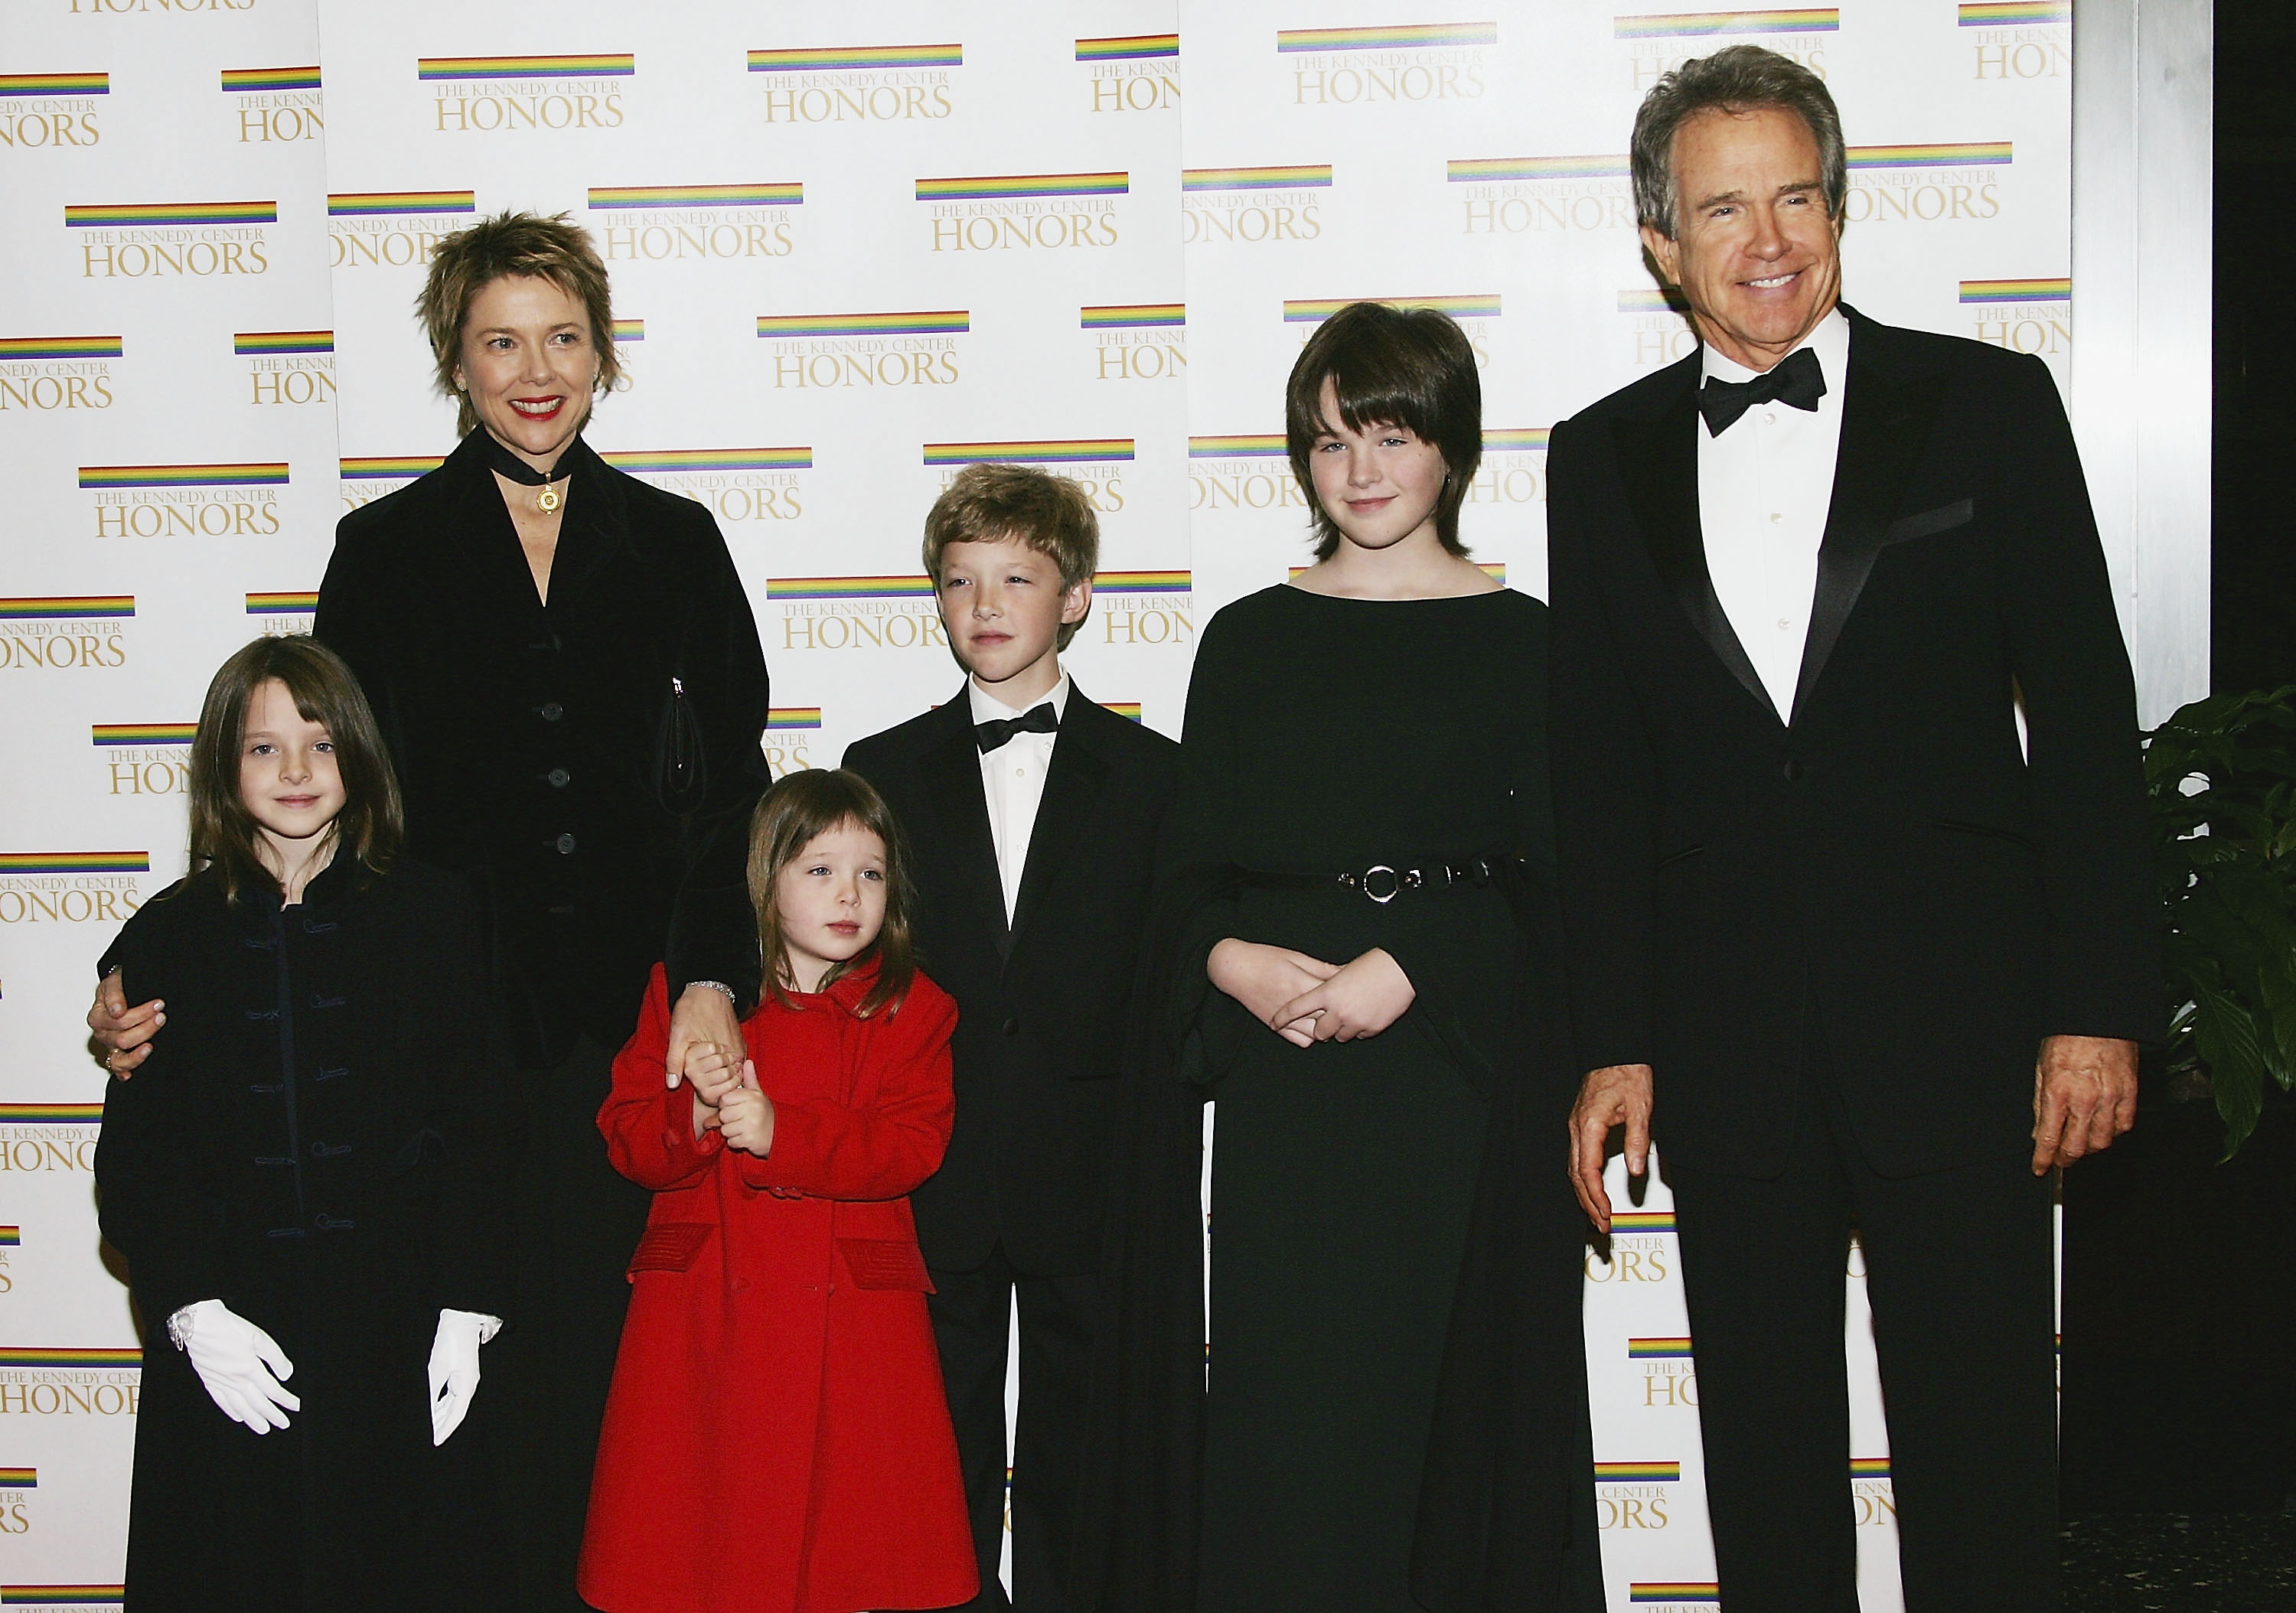 Warren Beatty poses with wife Annette Bening and children Isabel, Ella, Benjamin and Kathlyn at the 27th Annual Kennedy Center Honors at U.S. Department of State, December 4, 2004 in Washington, DC. | Source: Getty Images